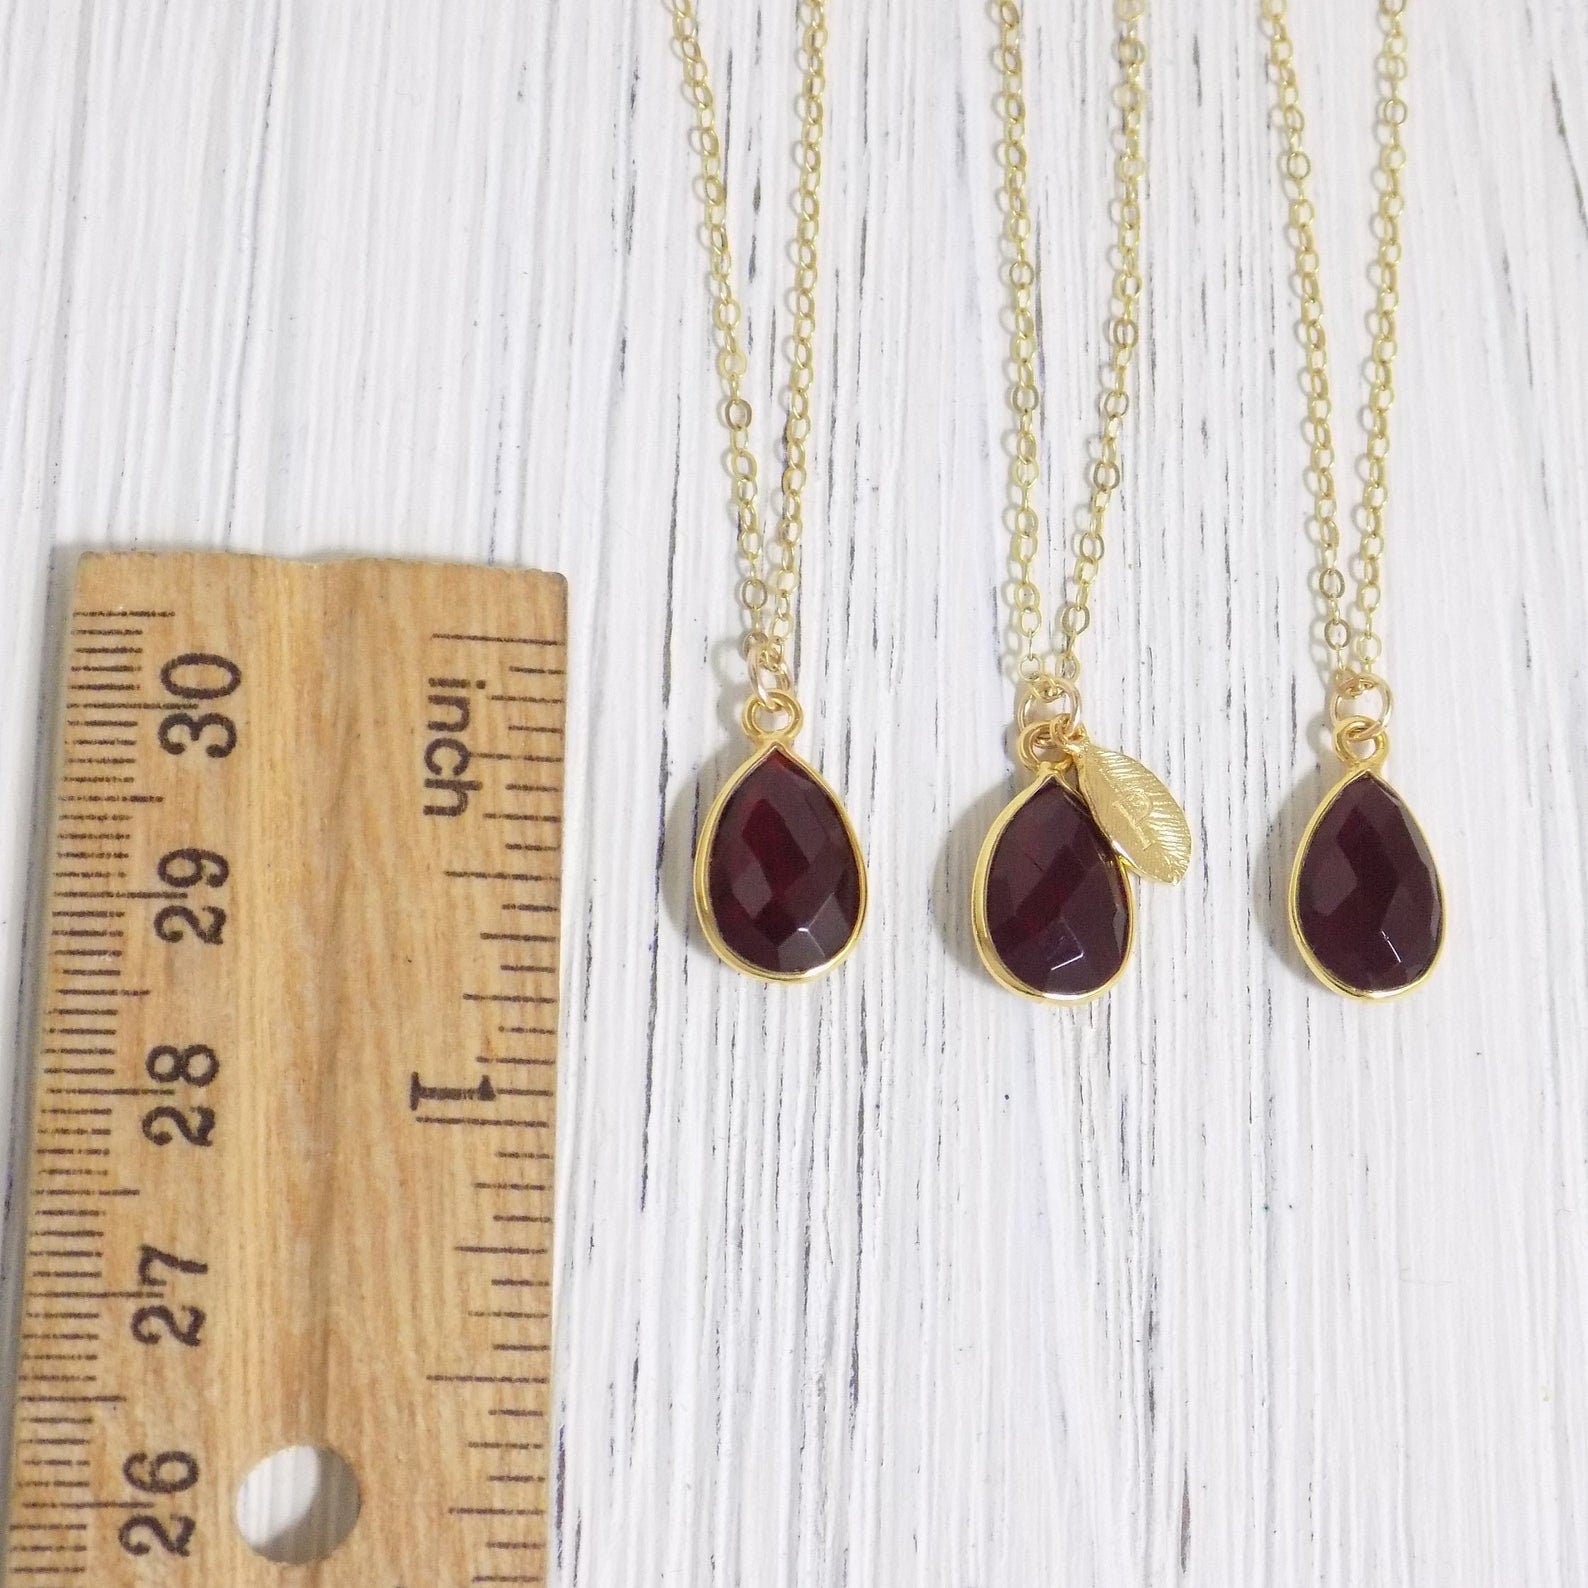 Garnet Necklace Gold Personalized, Wine Burgundy Crystal, January Birthstone, Valentines Day Gifts For Her, M4-44